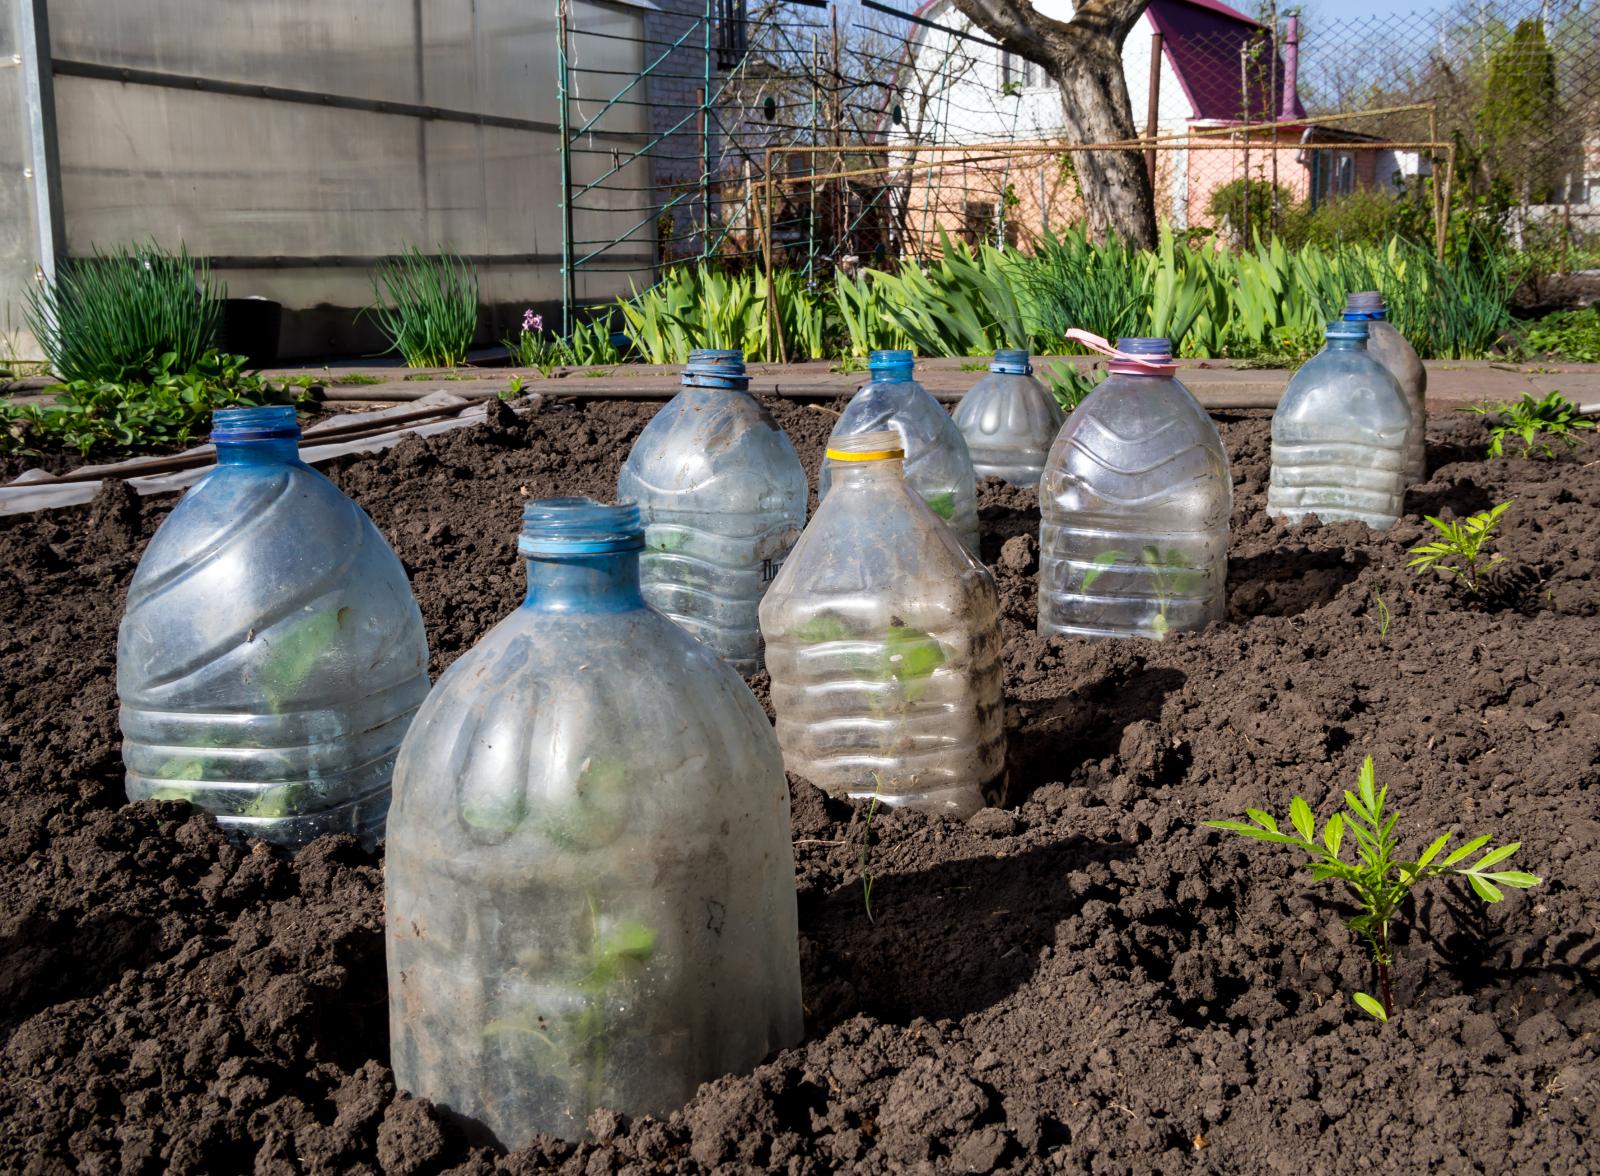 Using plastic bottles to protect plants